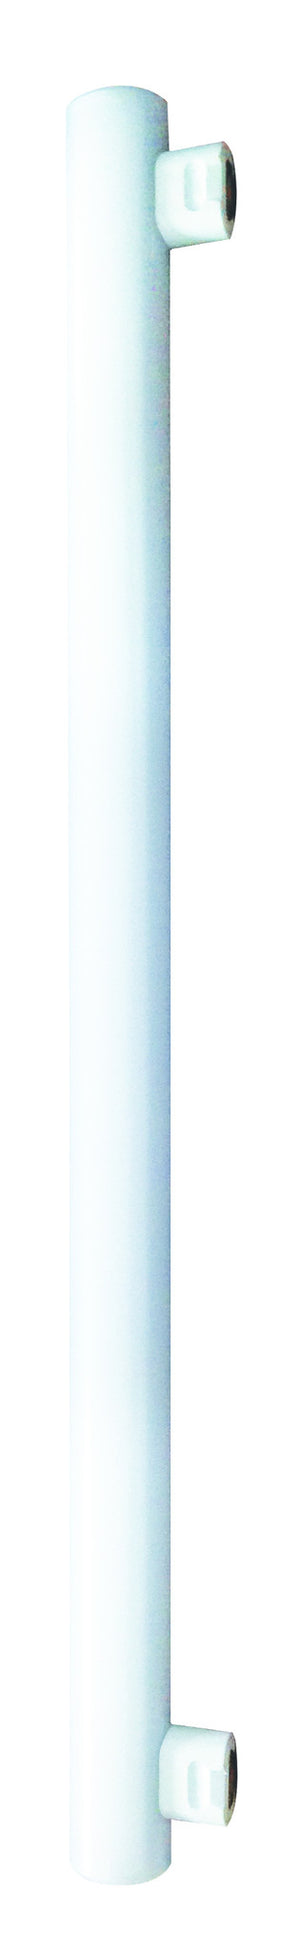 997013 - Tube lateral Fluo S14S 500mm 13W 2700K 550Lm GS TUBE The Lampco - The Lamp Company